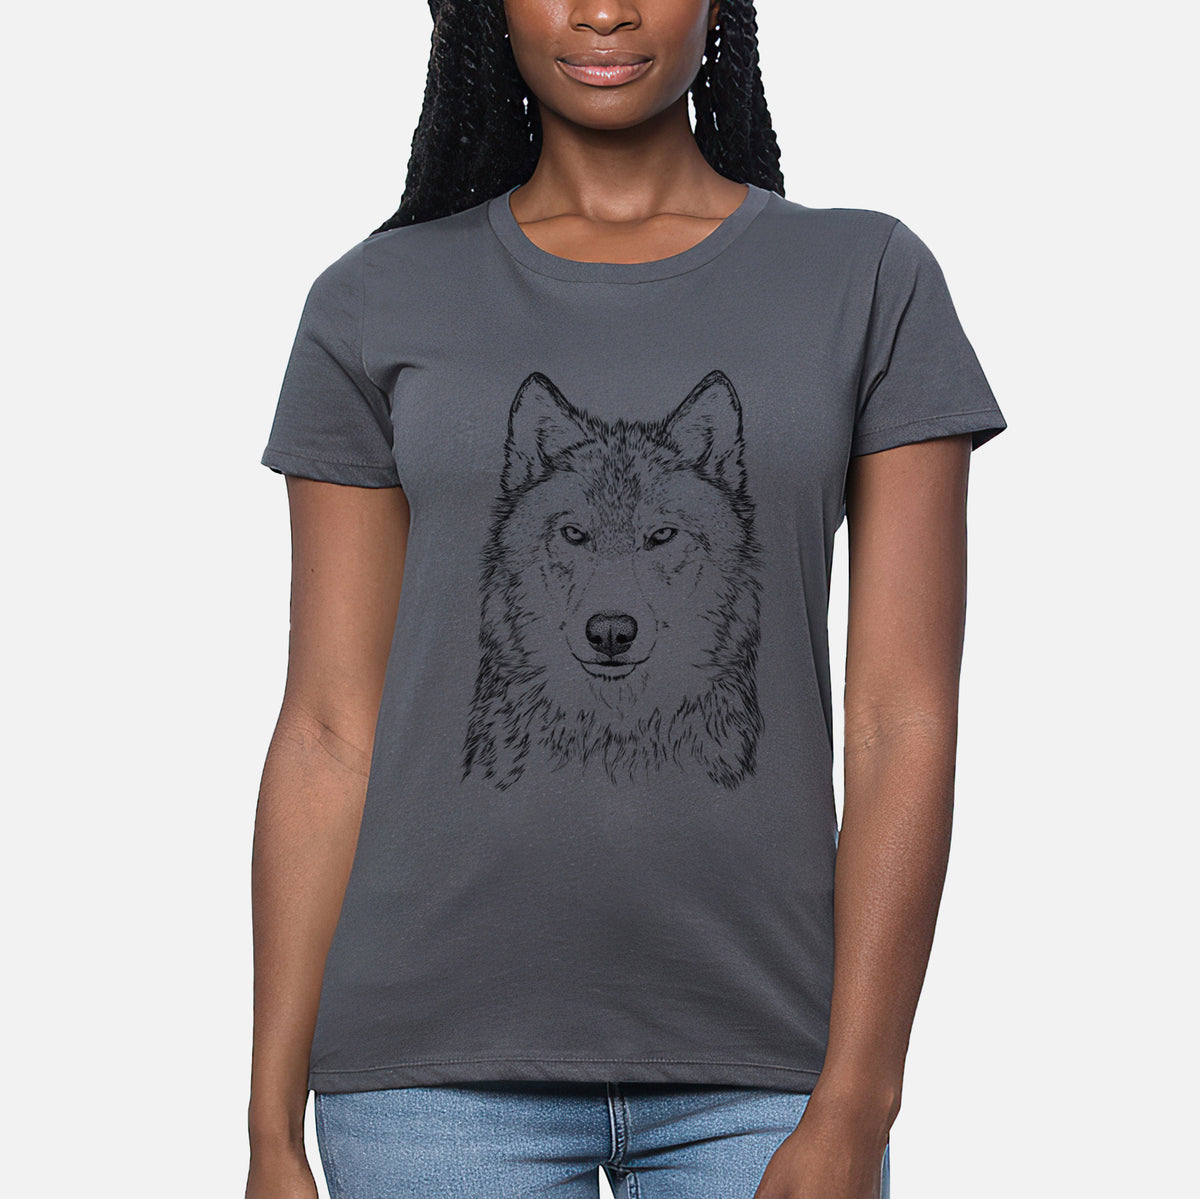 Grey Wolf - Canis lupus - Women&#39;s Crewneck - Made in USA - 100% Organic Cotton